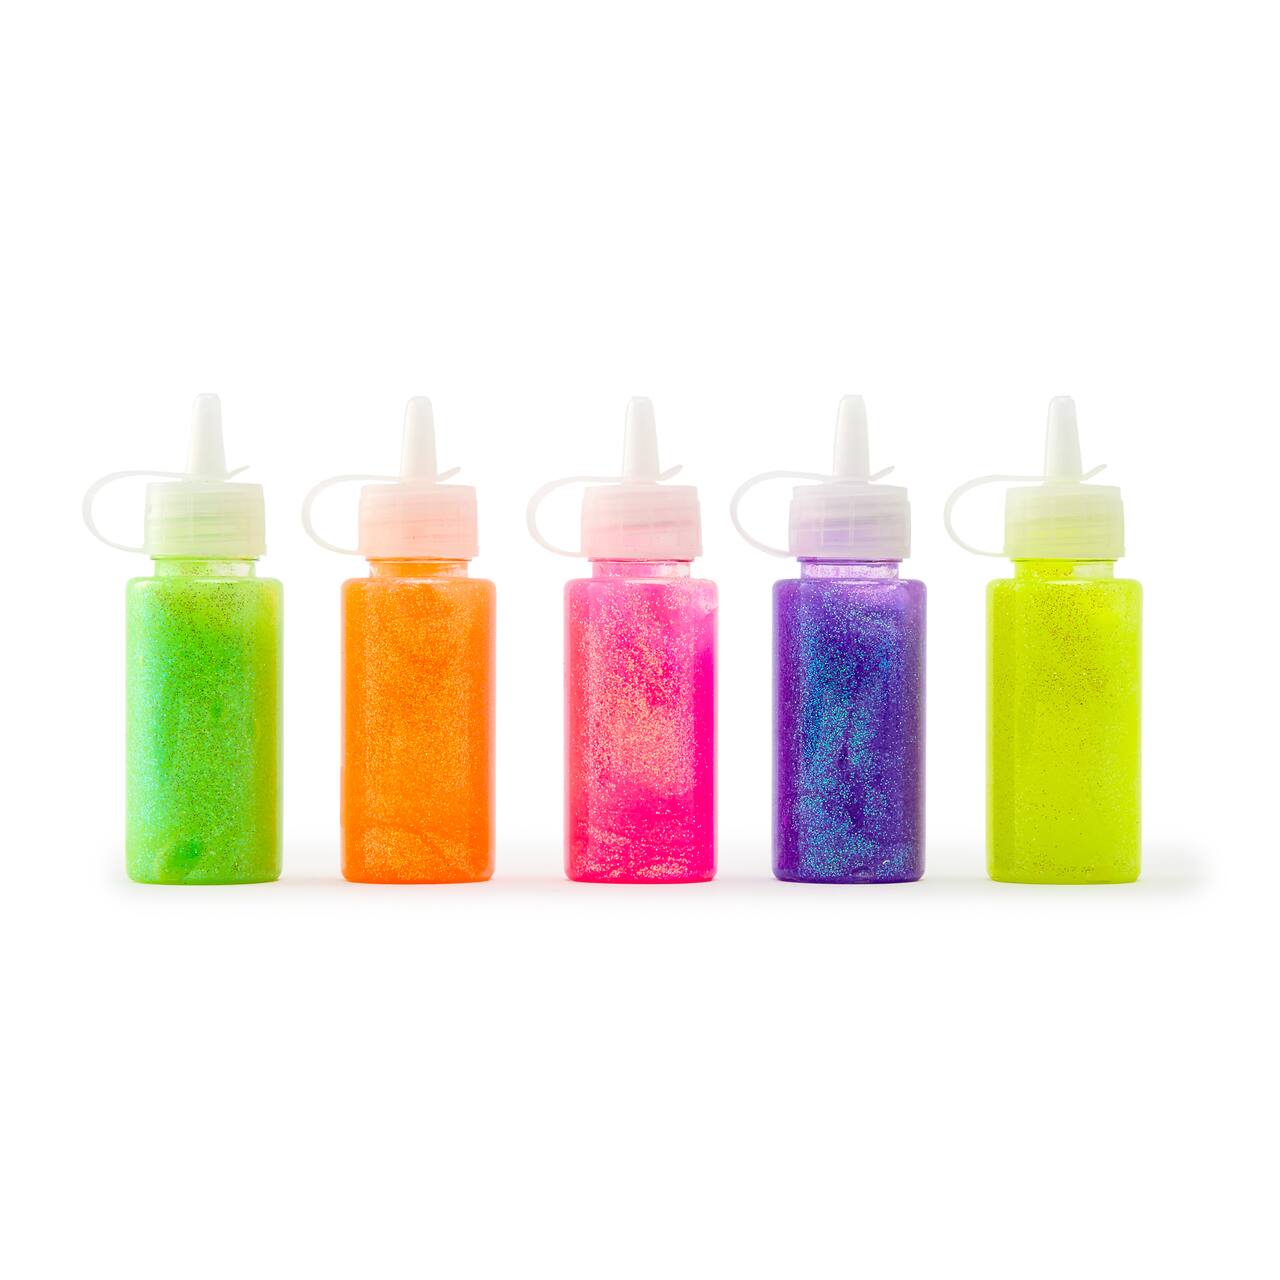 6 Packs: 5 ct. (30 total) Scented Glitter Glue Bottles by